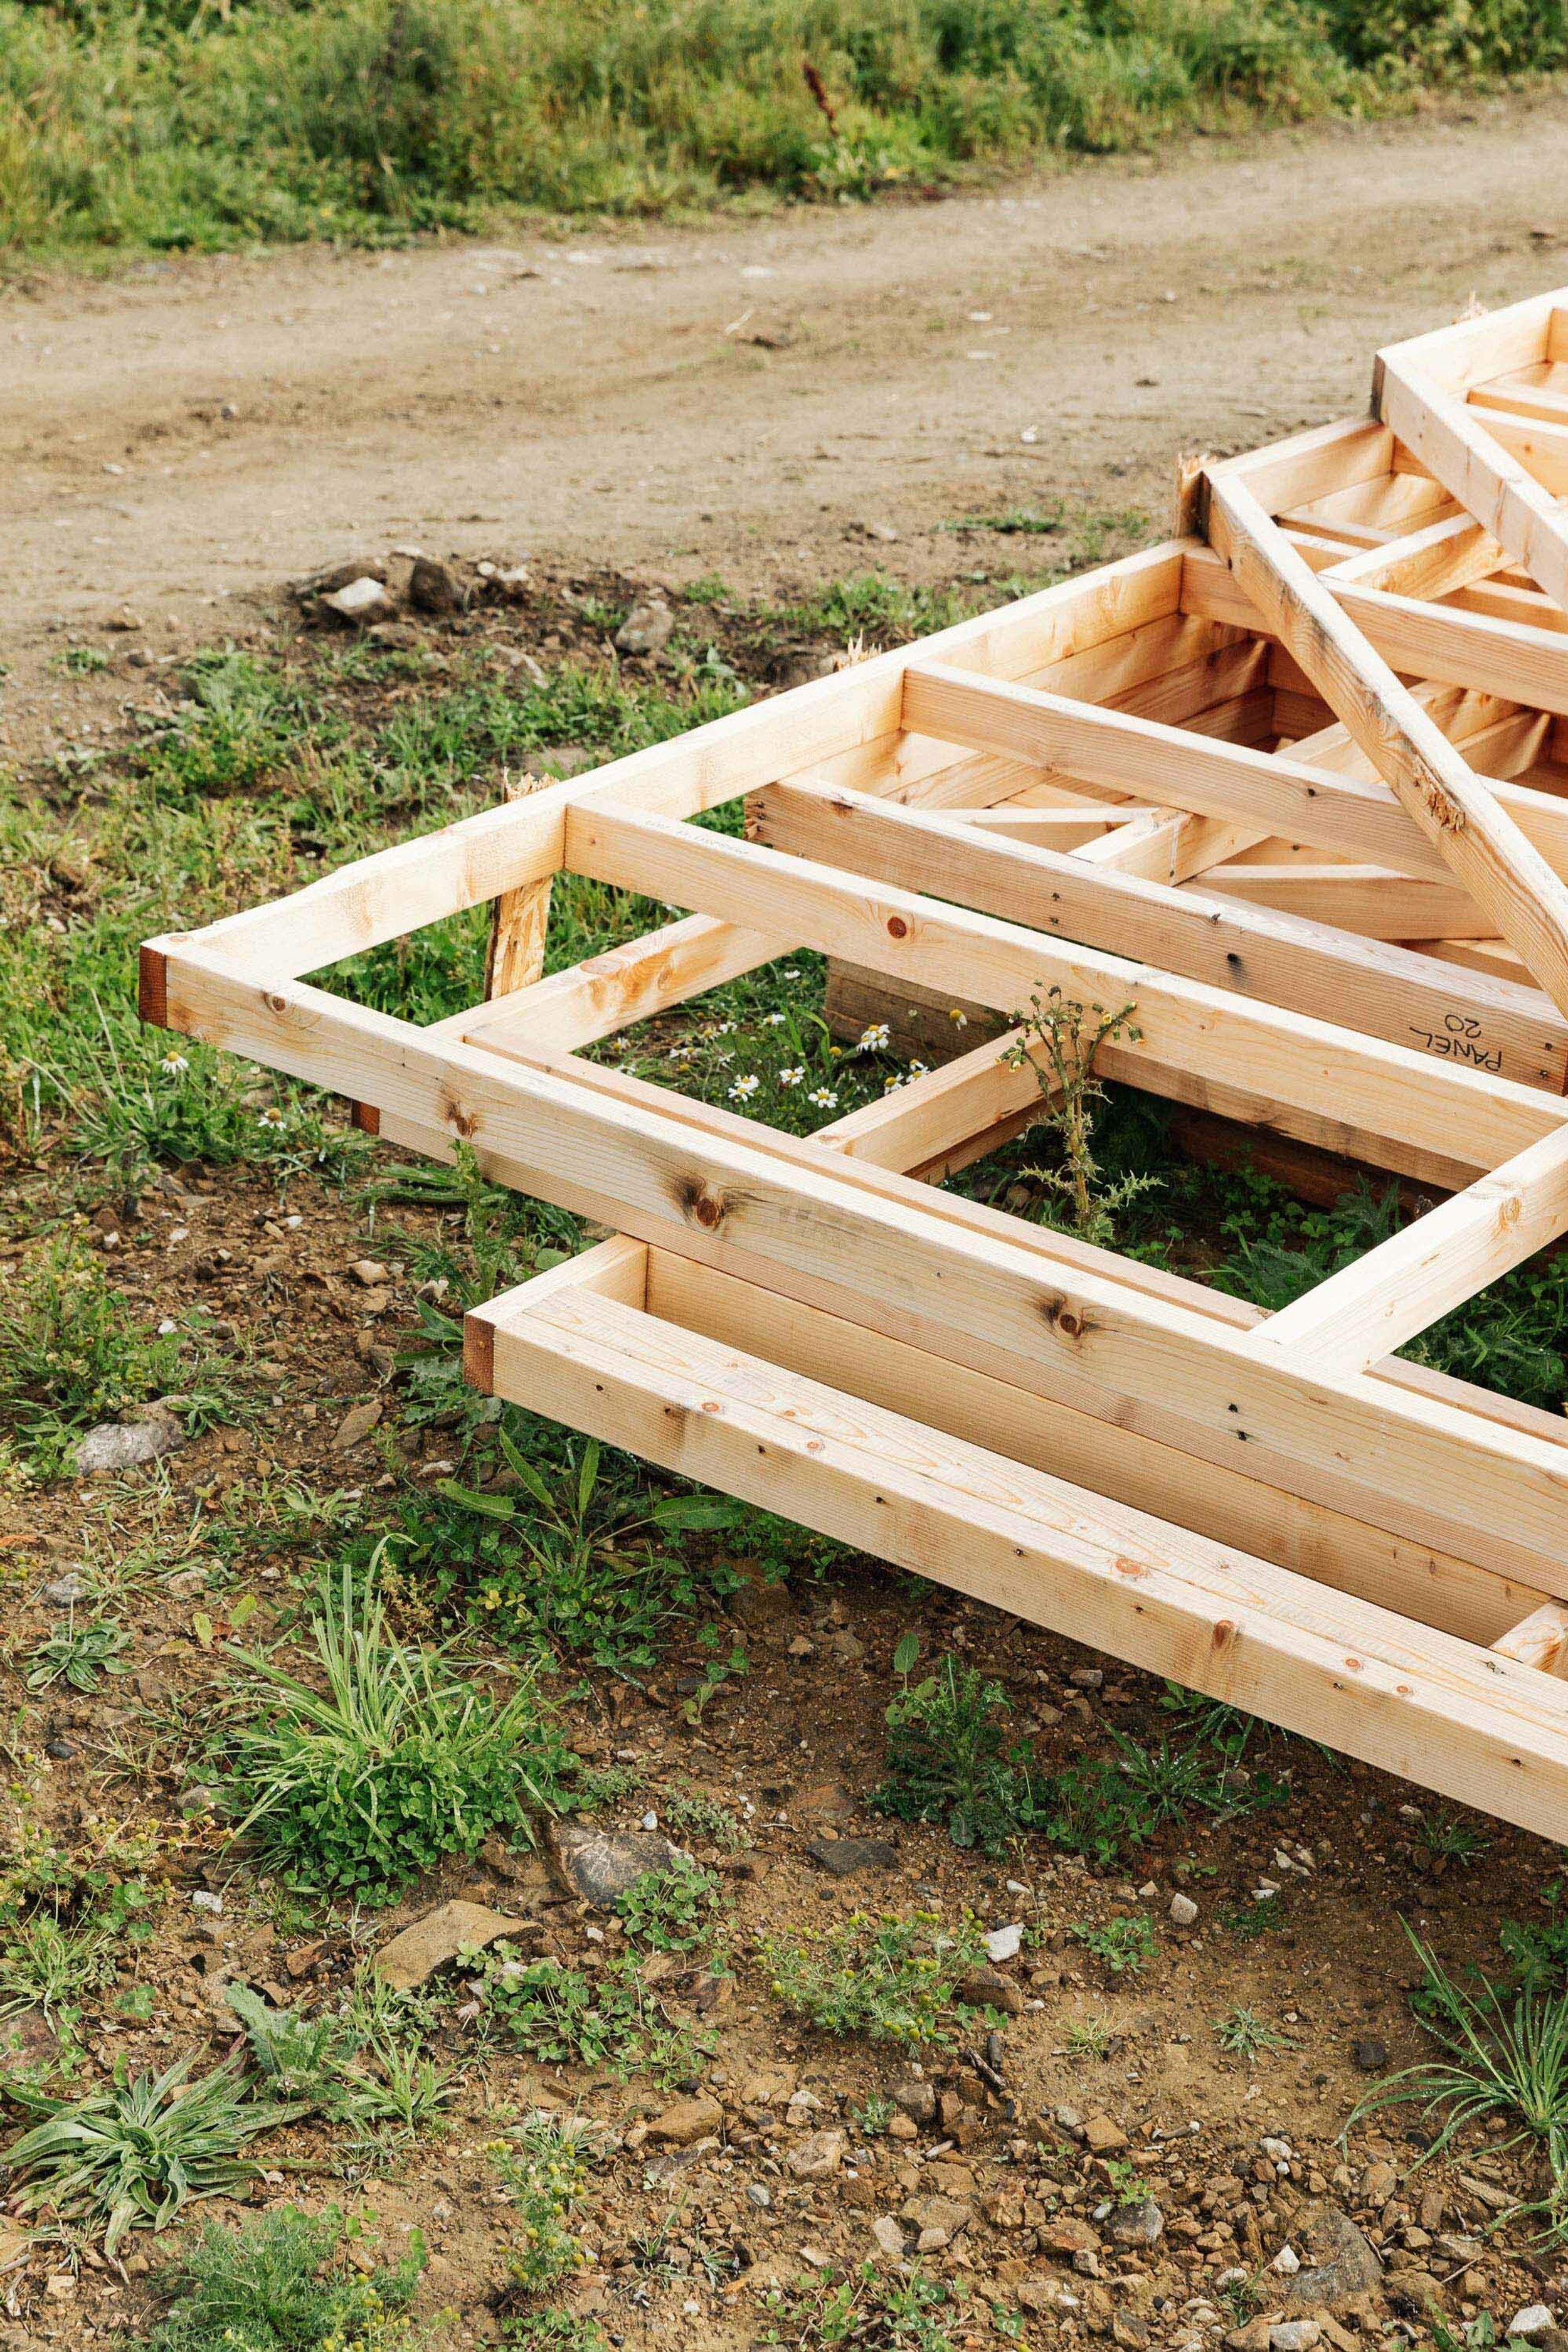 A timber frame sits on the ground at a new build construction site. Grass and daises surround the timber.